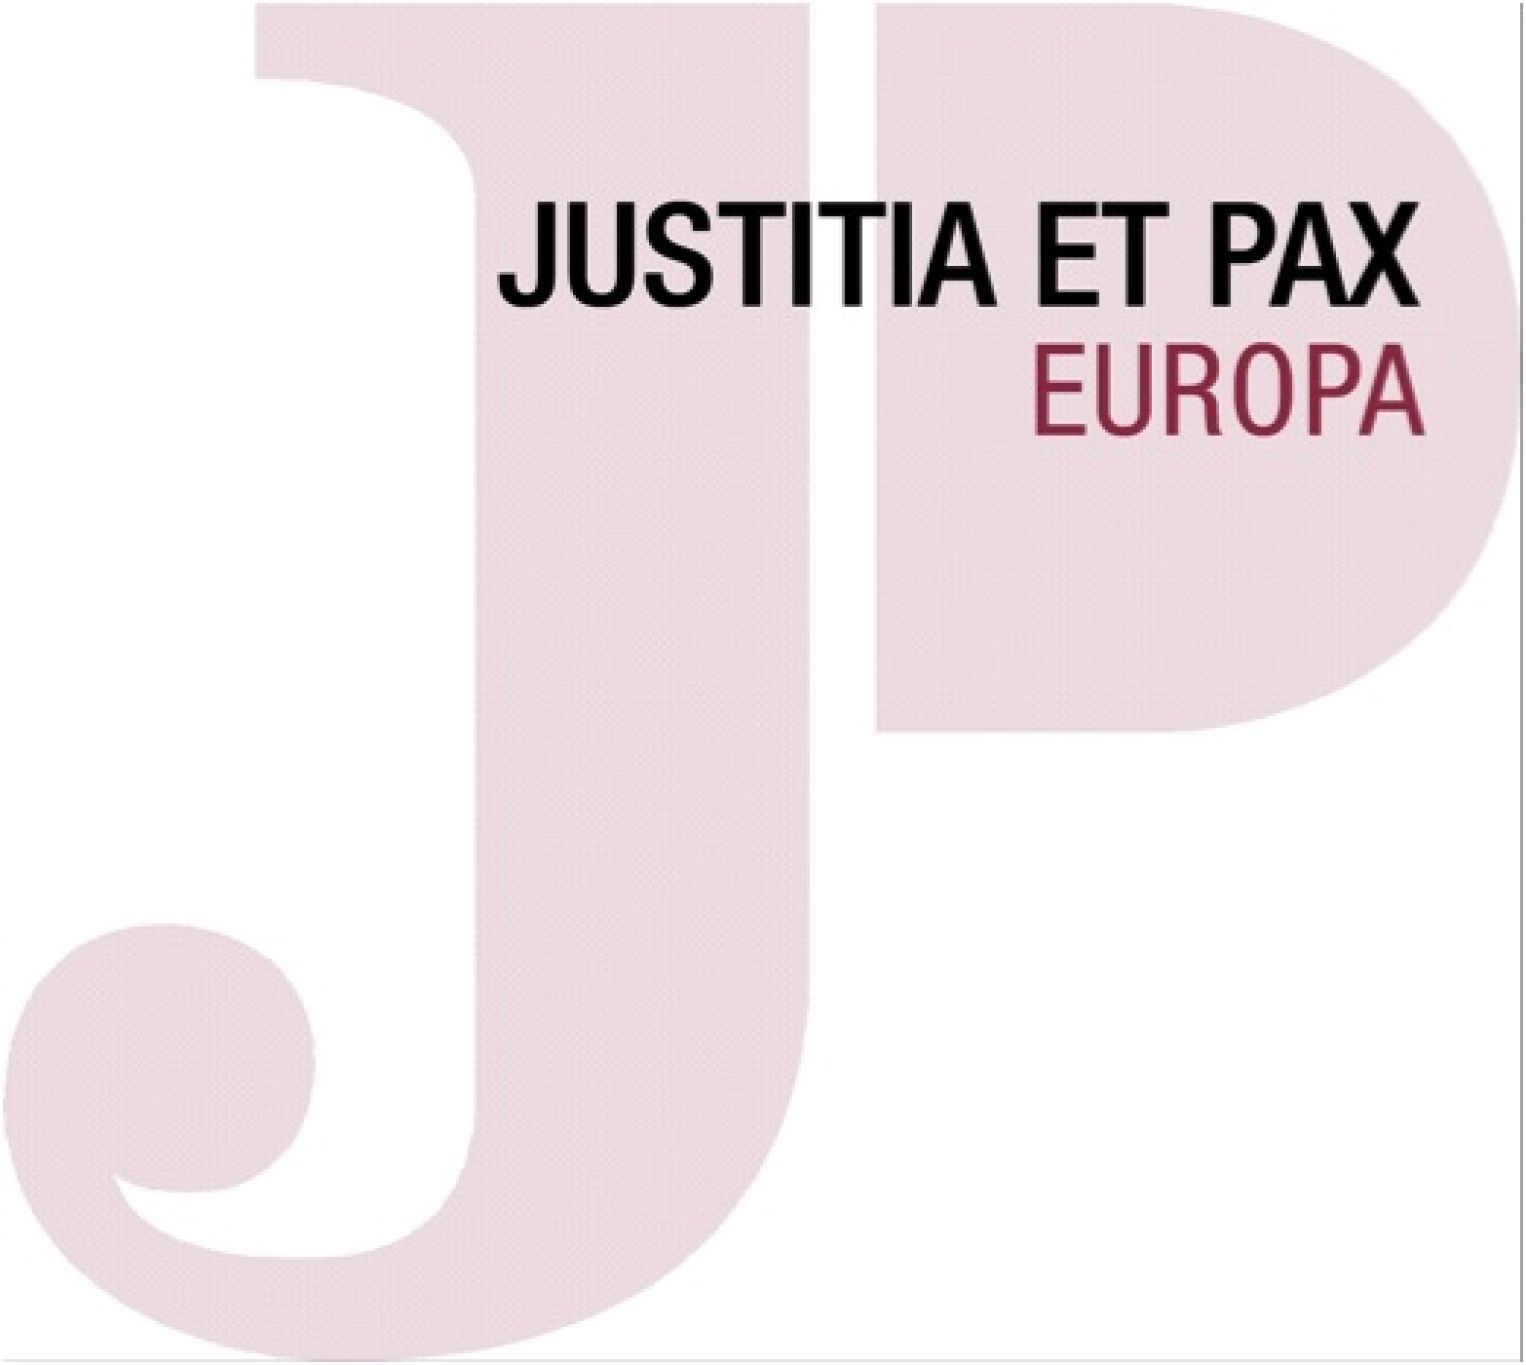 International Workshop and General Assembly of Justice&Peace Europe in Luxembourg